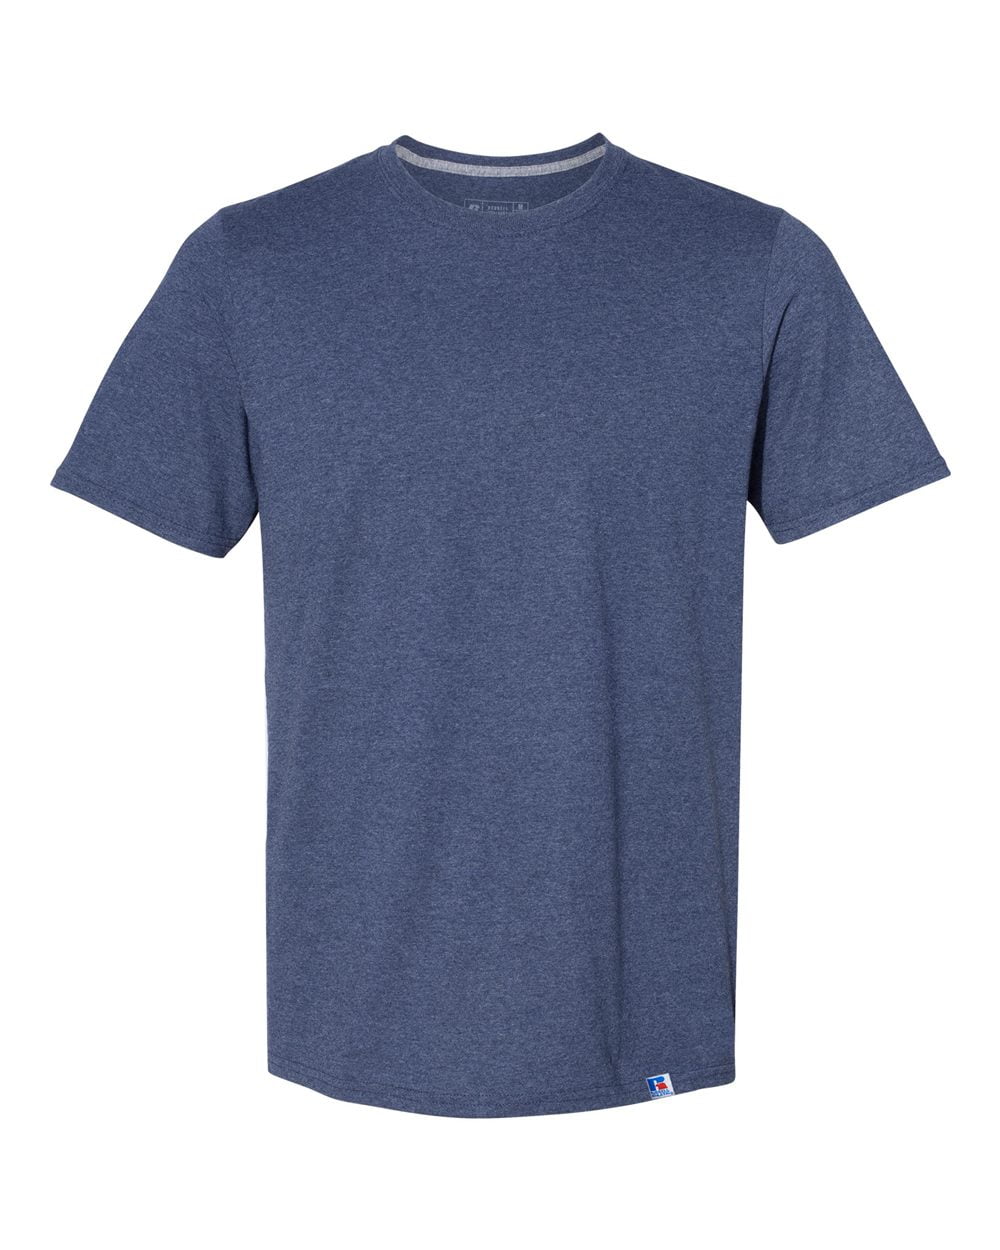 Men's Essential Blend Performance Tee S-3XL Russell Athletic Sports T-Shirt 